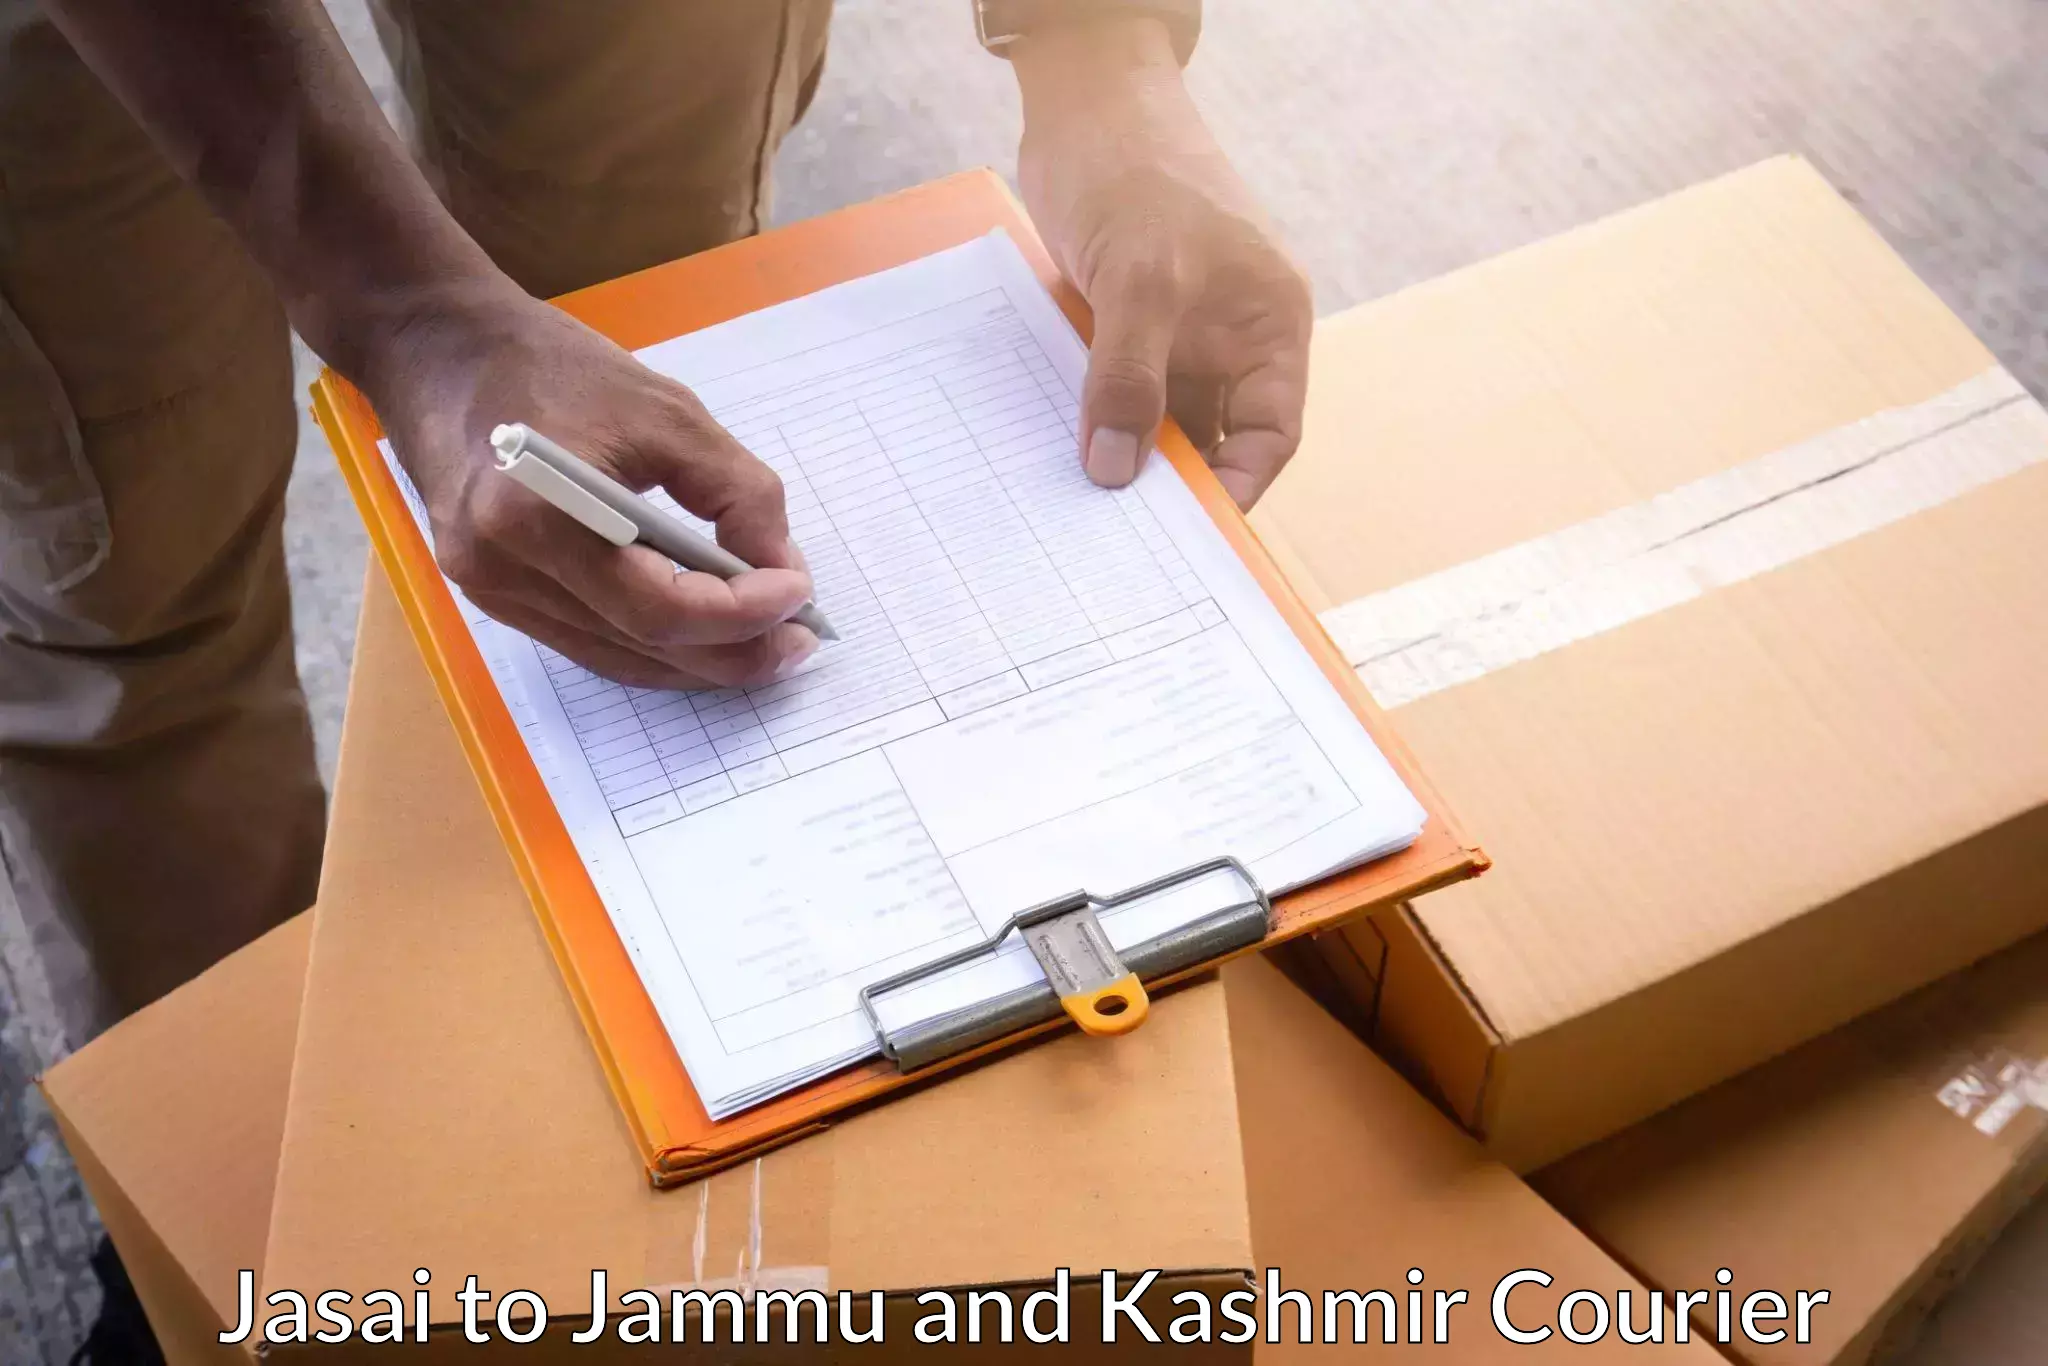 Courier service efficiency Jasai to Jakh